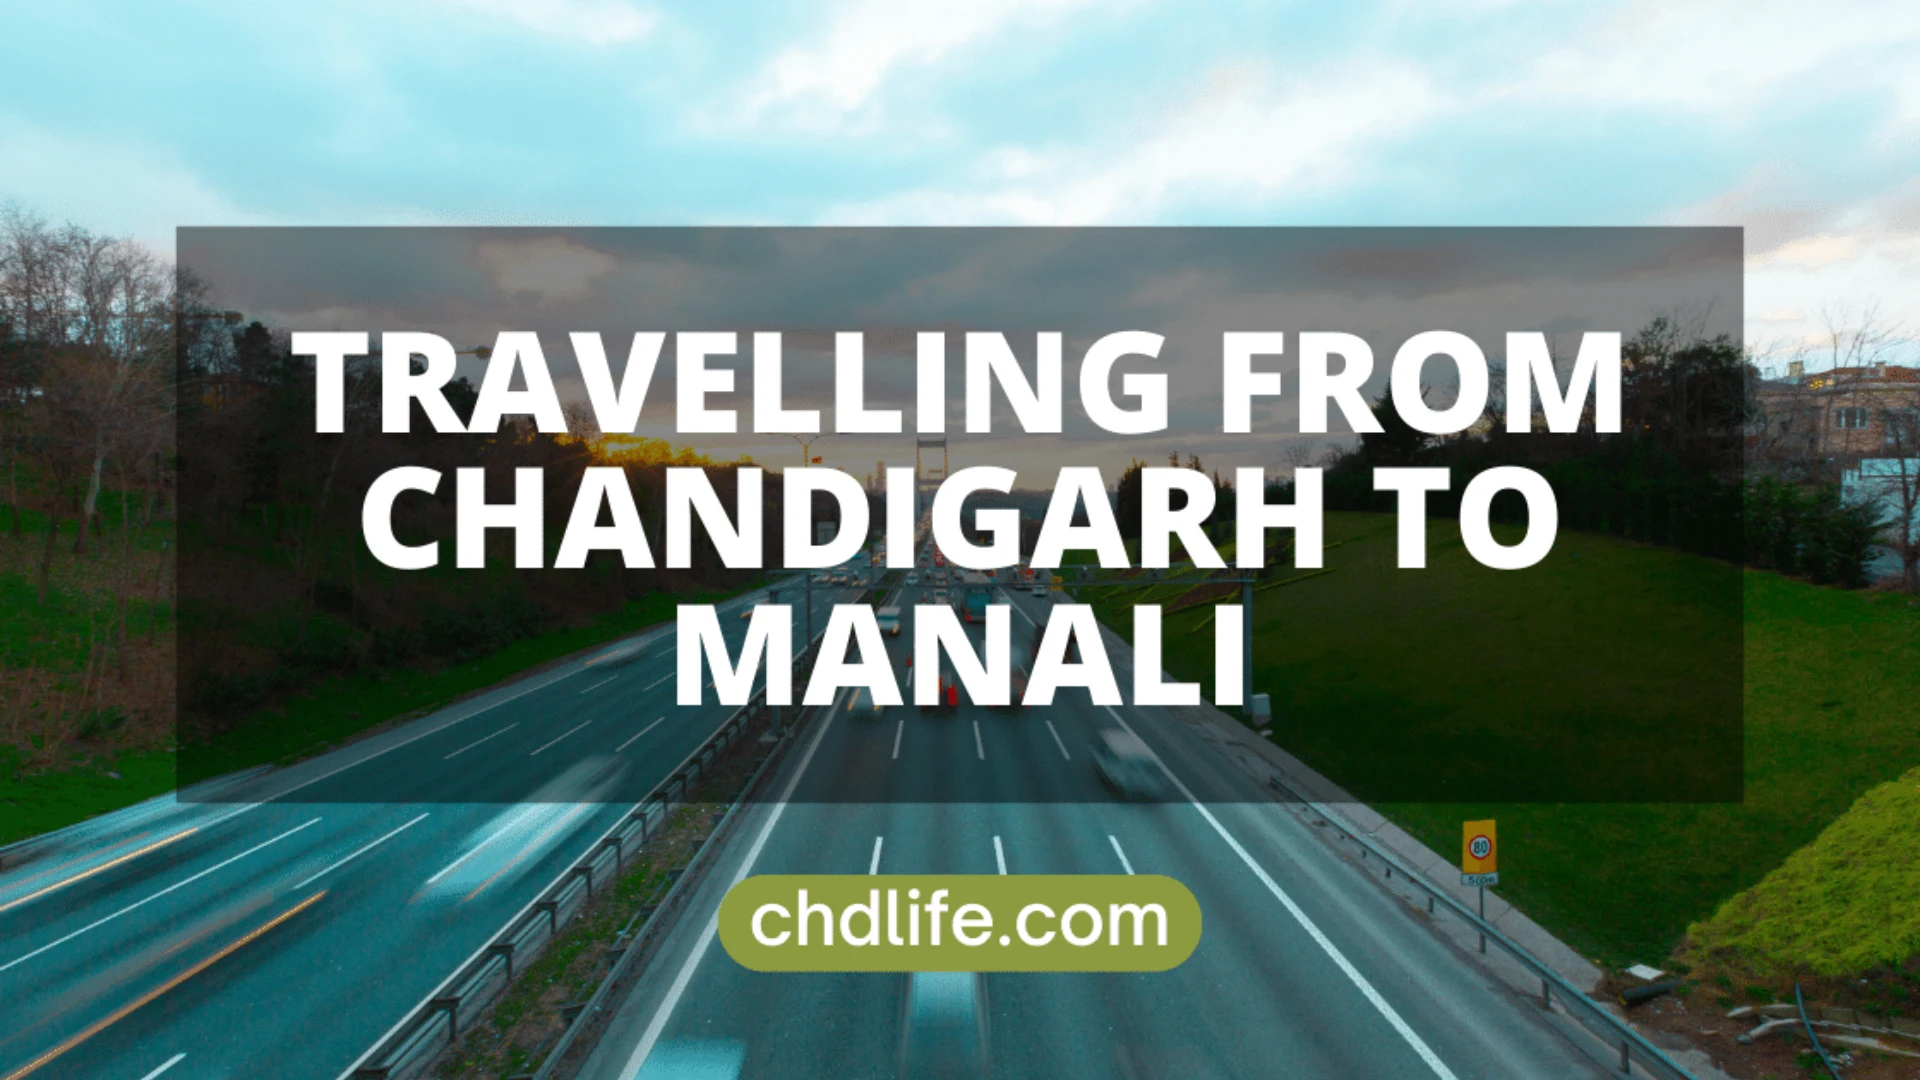 CHANDIGARH TO MANALI: A SCENIC DRIVE THROUGH THE MAJESTIC HIMALAYAS